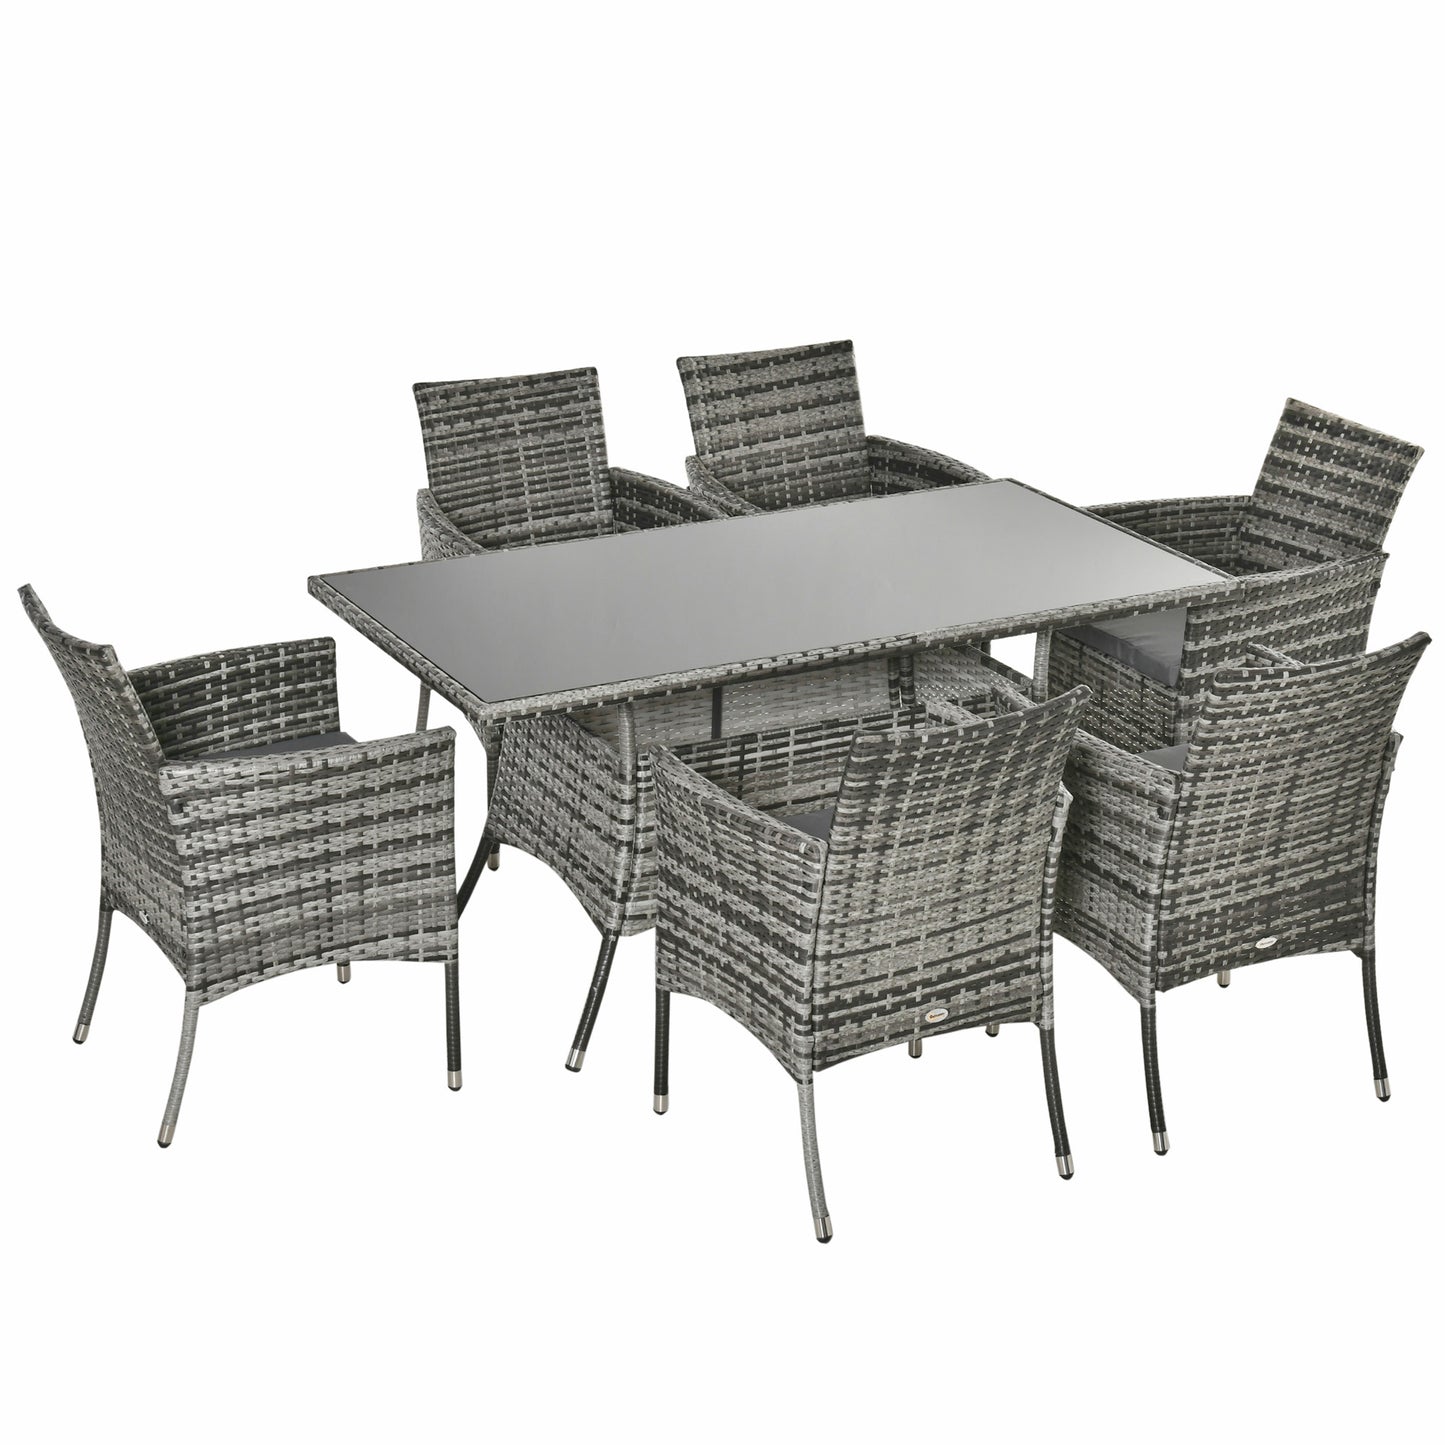 Outsunny Rattan Dining Set Conservatory 7pcs Garden Furniture Seaters Patio Weave Outdoor